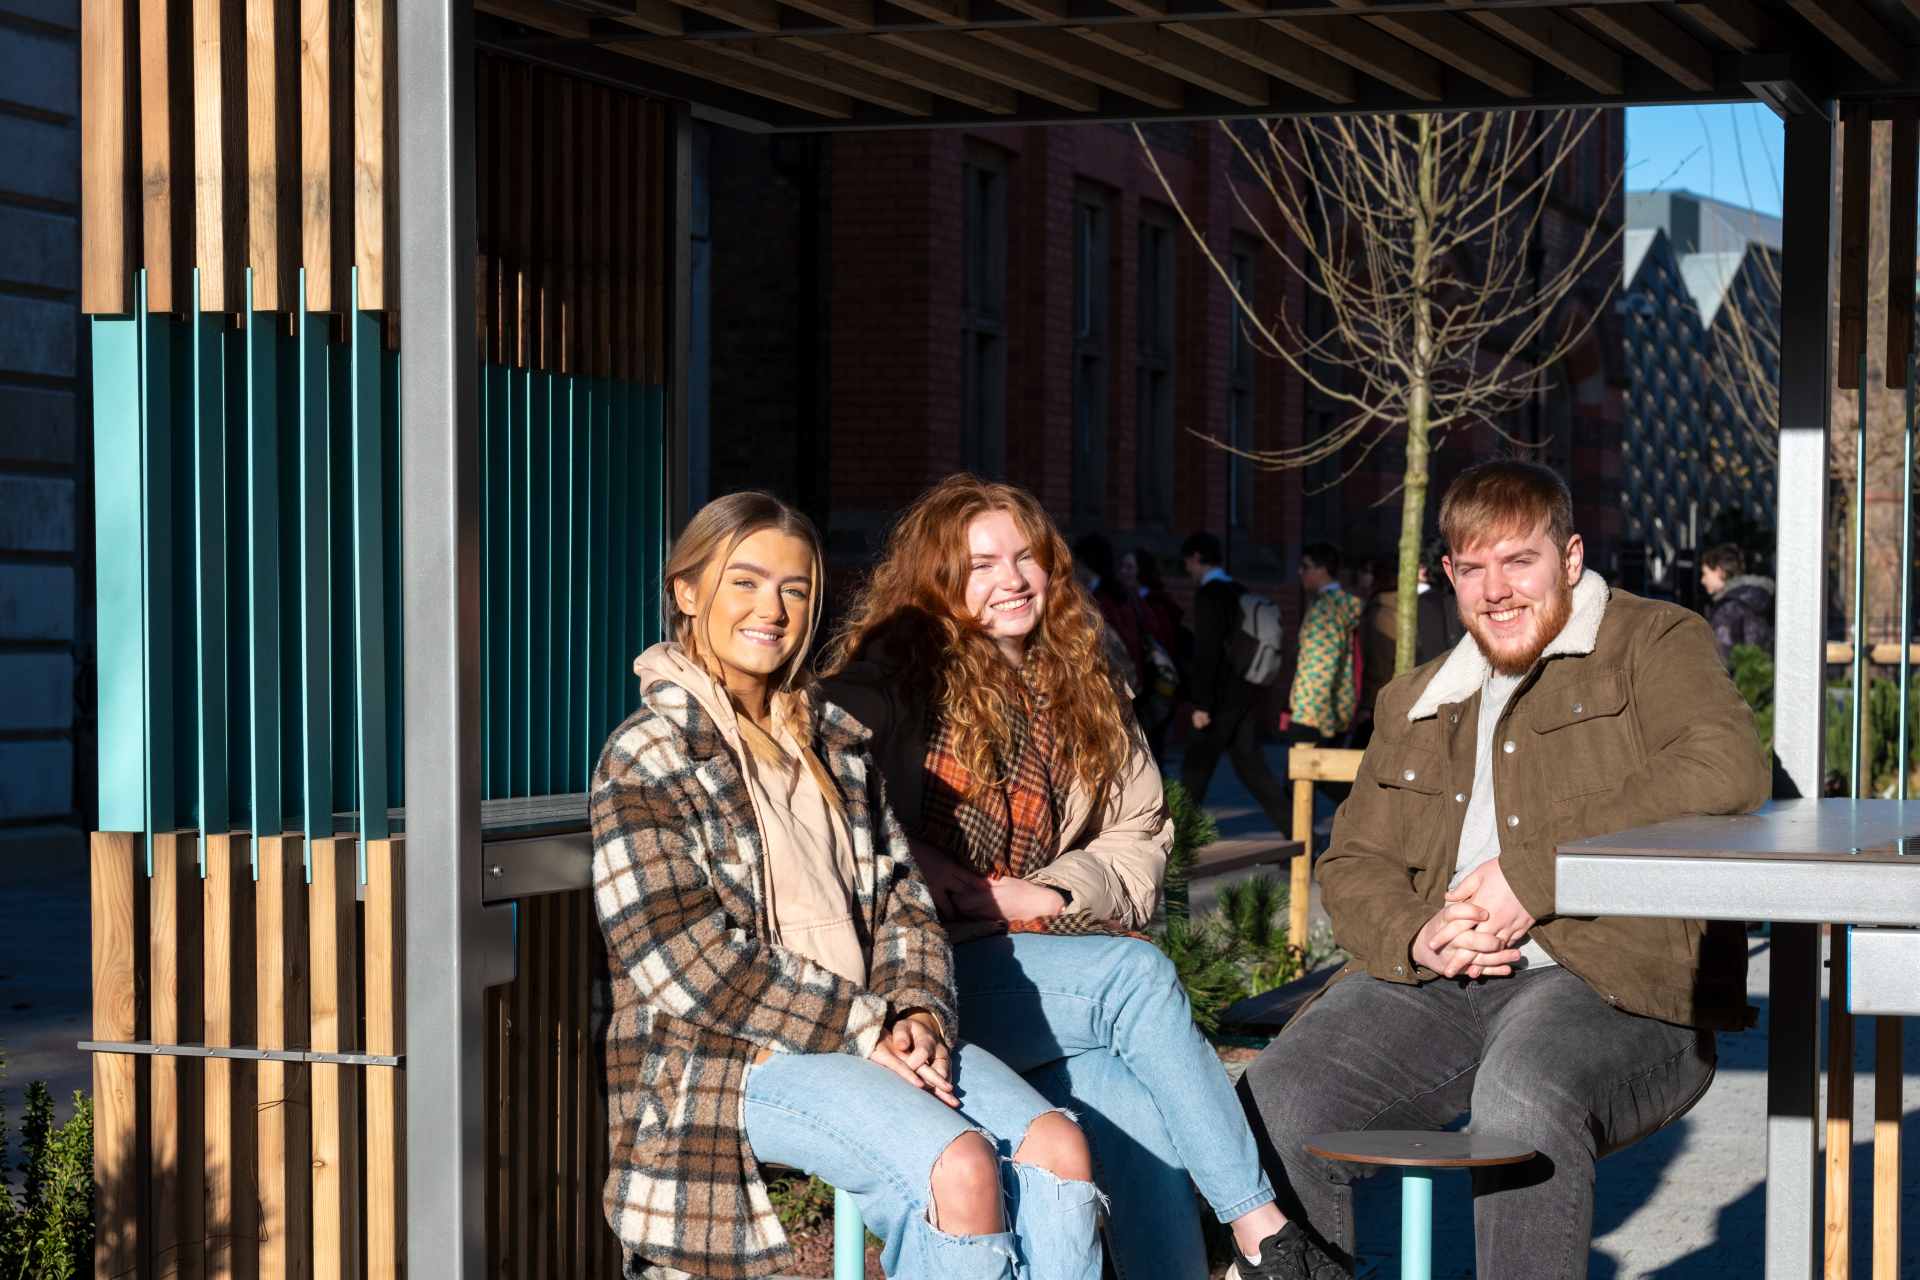 A group of students sitting in the pods outside in the sunshine.